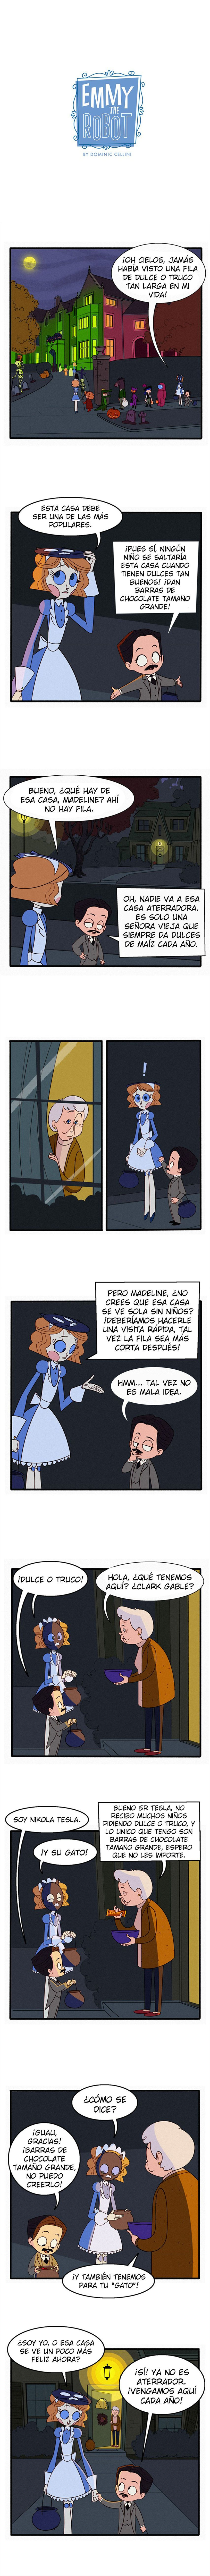 Emmy The Robot [Spanish] (Ongoing) 28